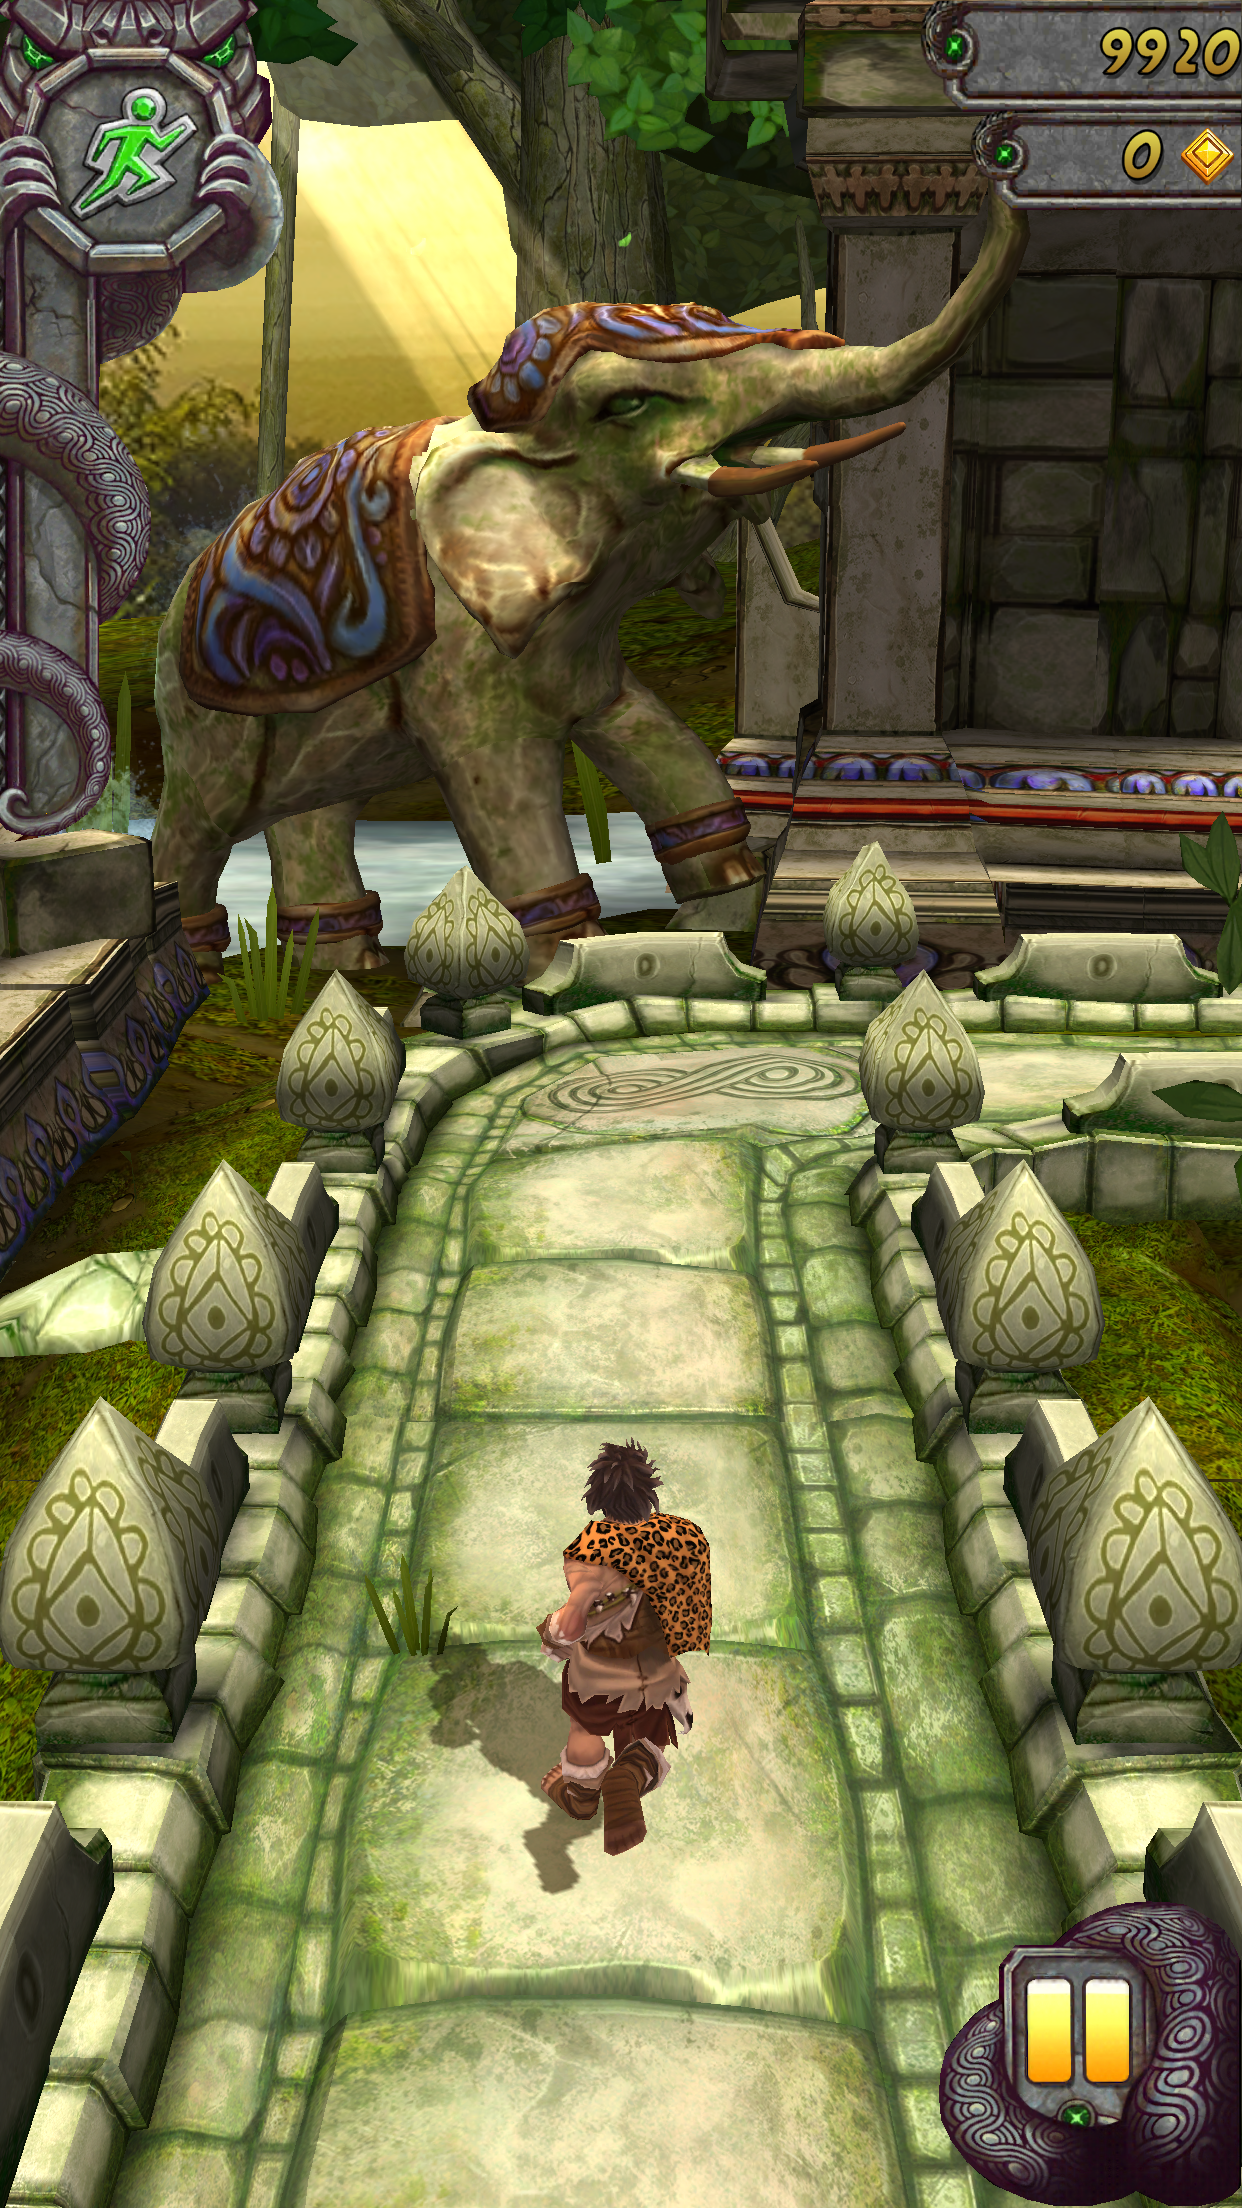 Play Temple Run 2 Online for Free on PC & Mobile